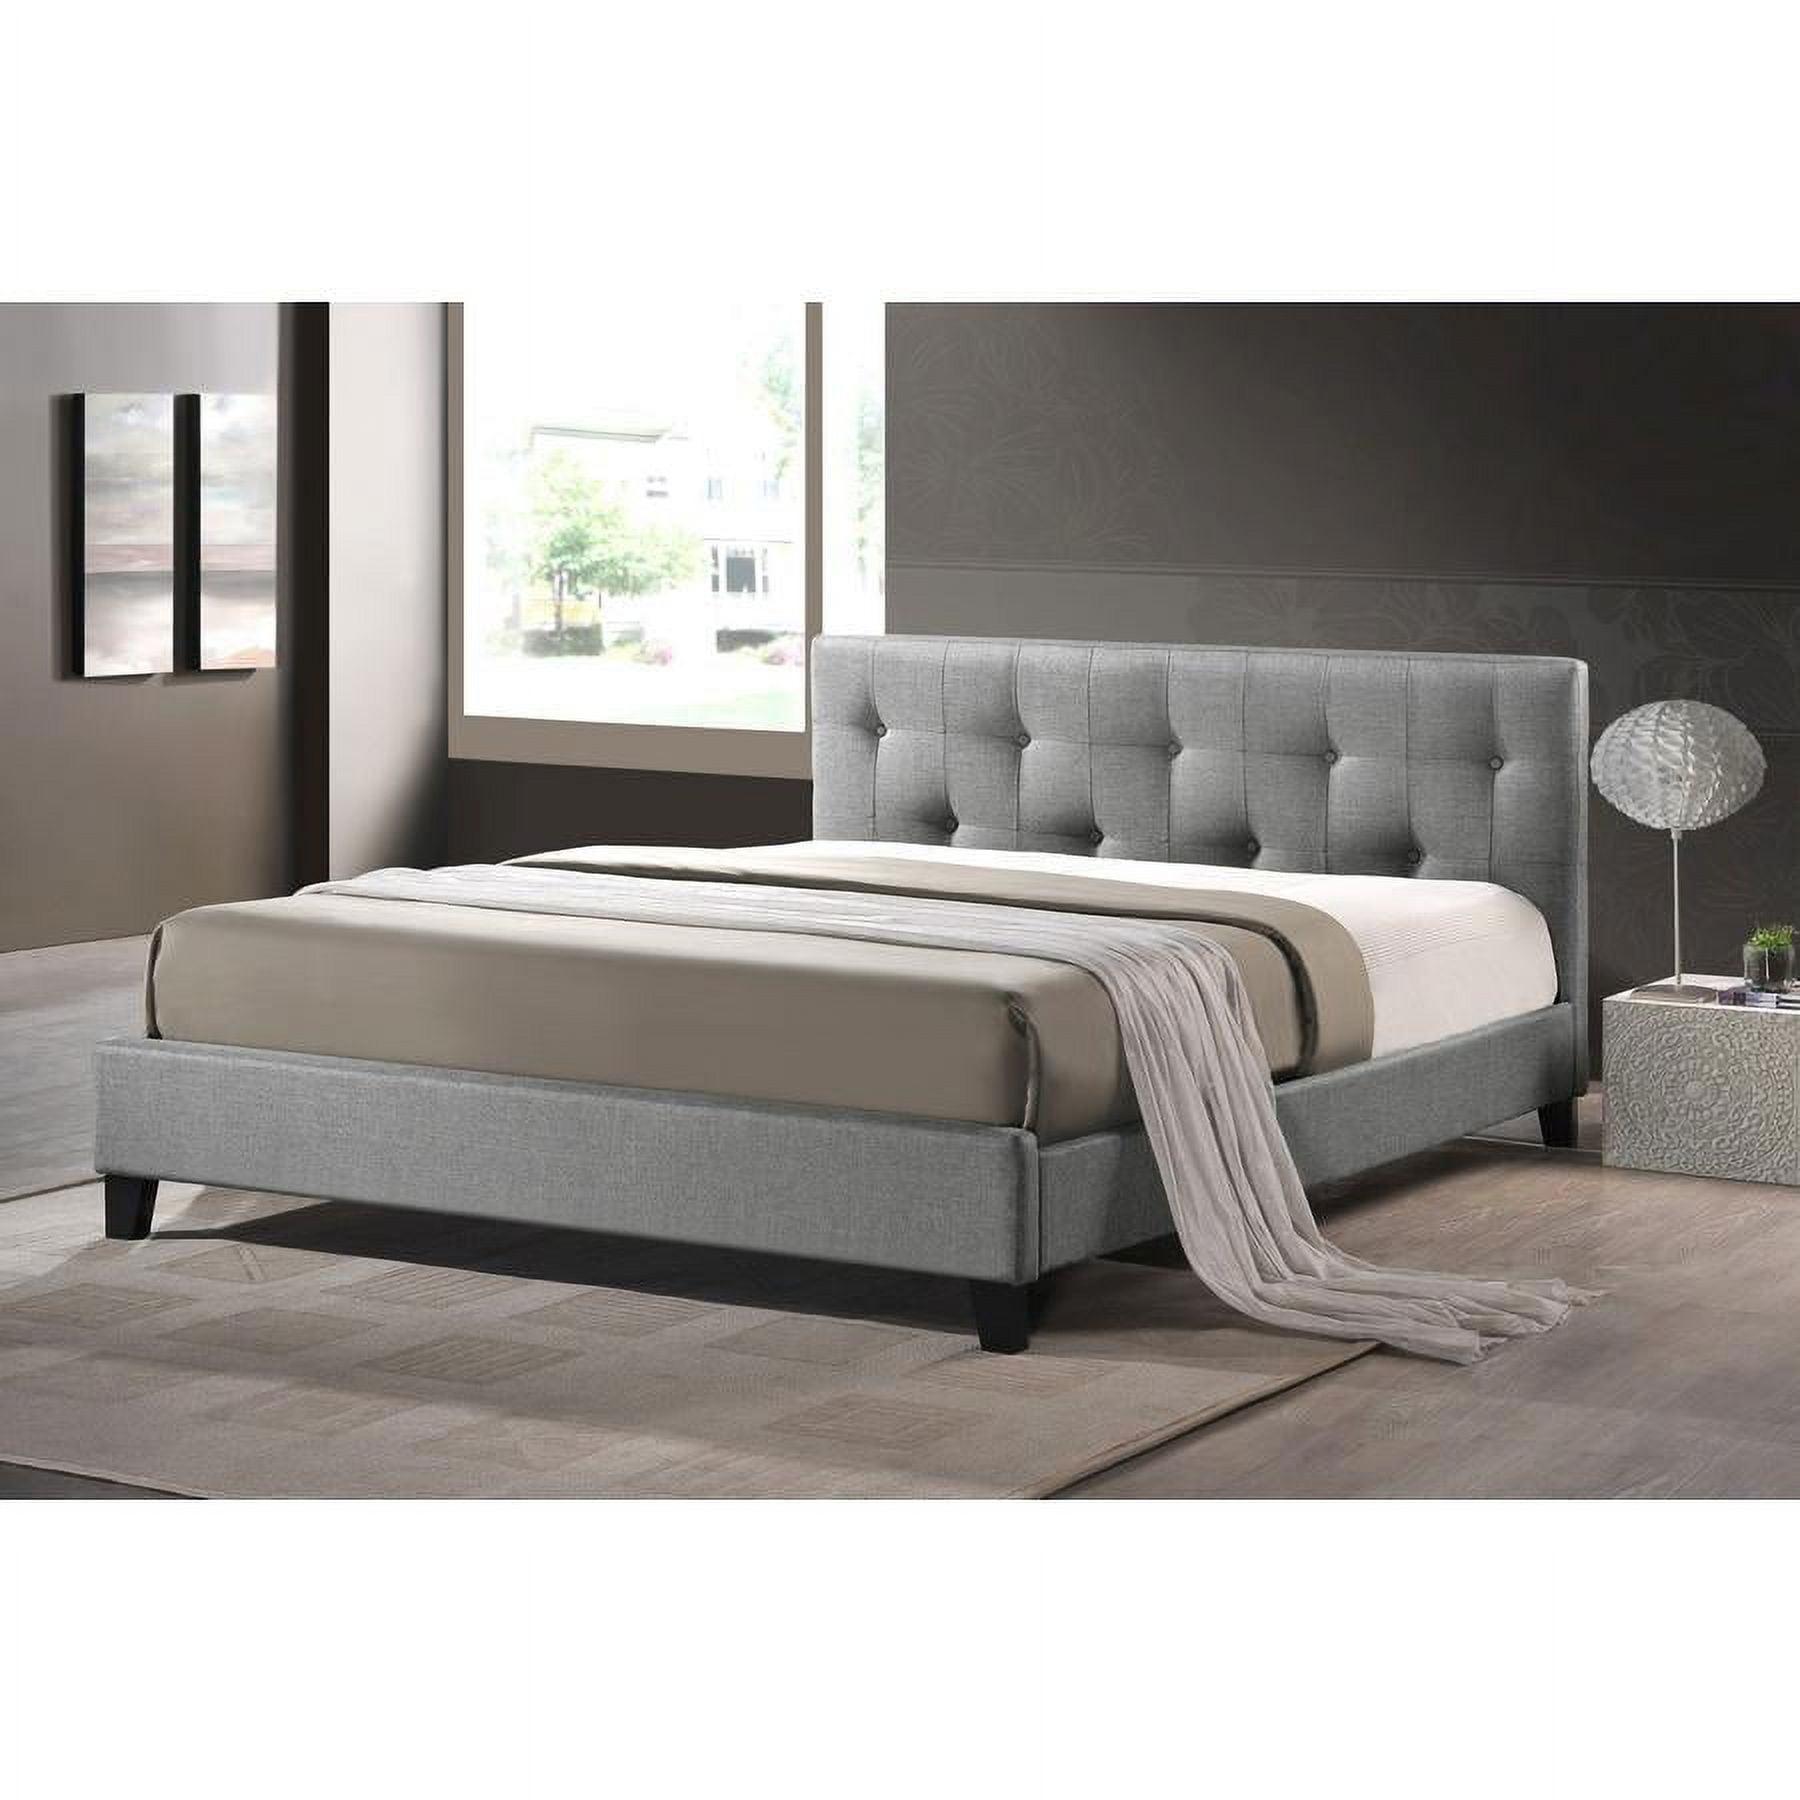 Queen Gray Linen Upholstered Platform Bed with Tufted Headboard